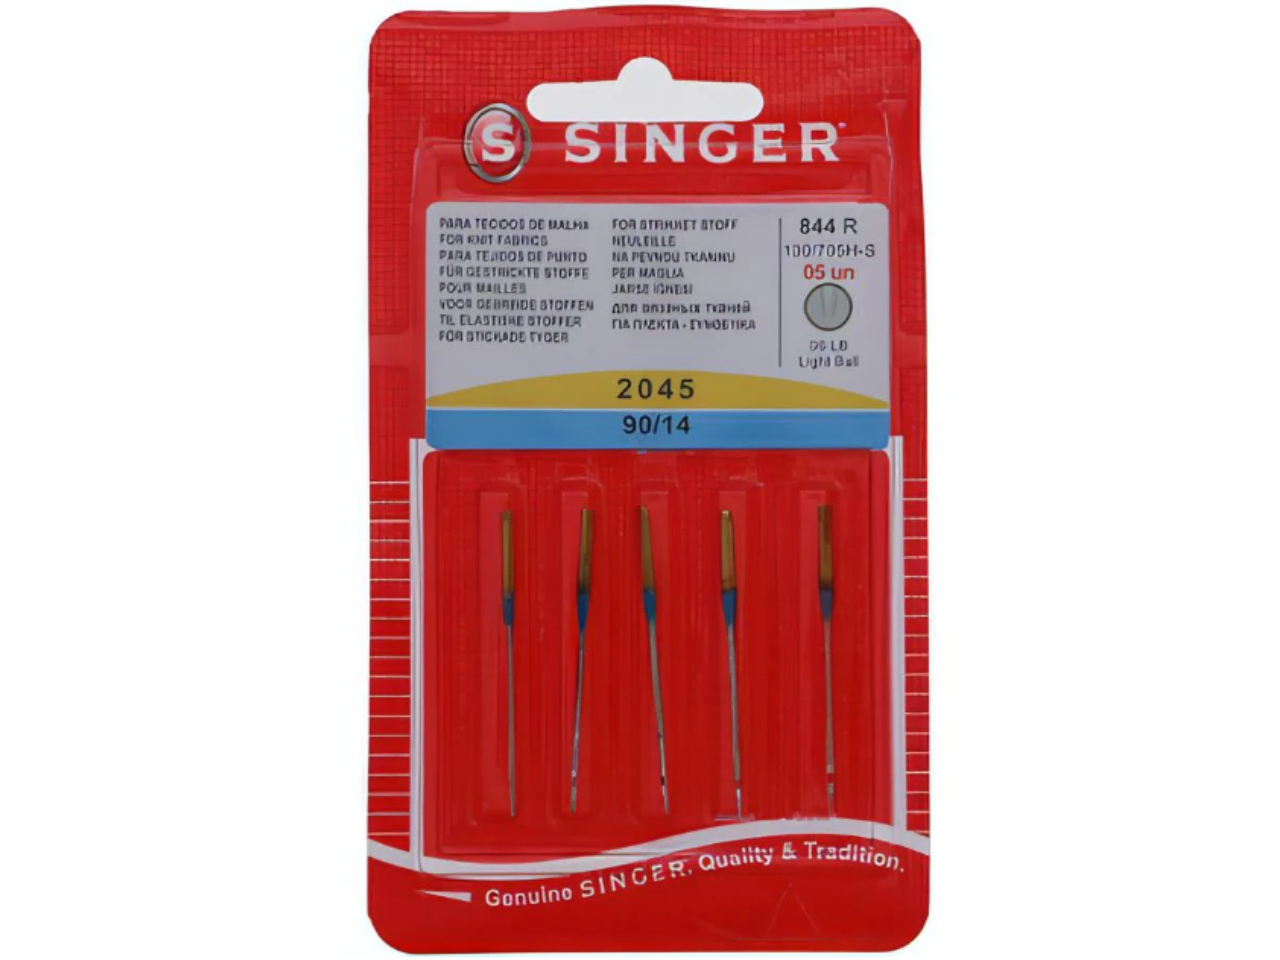 2045 SINGER Knit/Stretch Needles Pack (5)